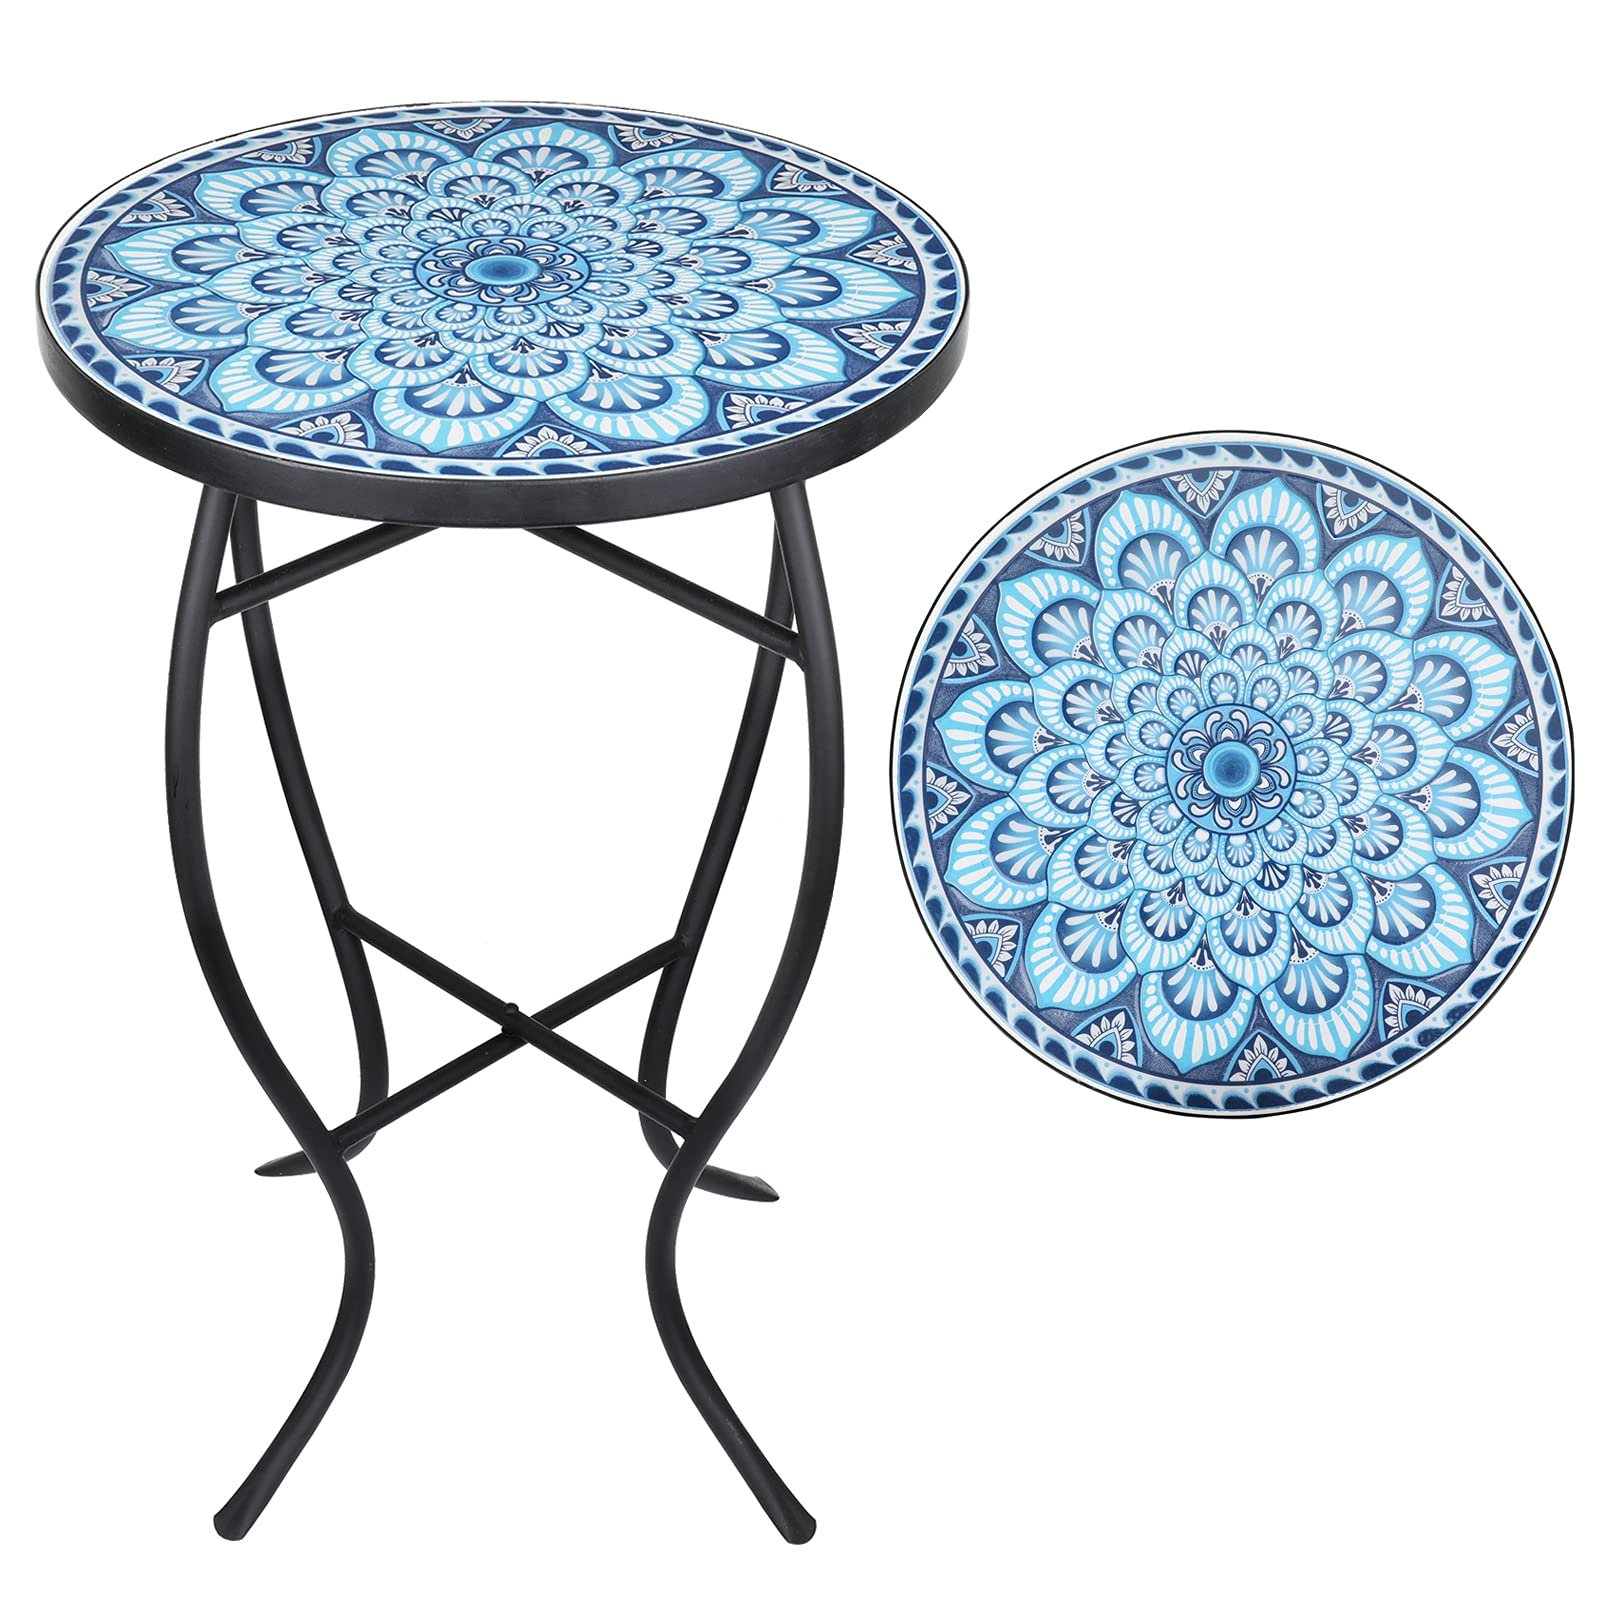 Outdoor Side Table-Patio End Table-Small Patio Table Coffee Table Outside Accent Table Mosaic Glass Metal Side Table Garden Balcony Indoor Coffee Table - image 1 of 6